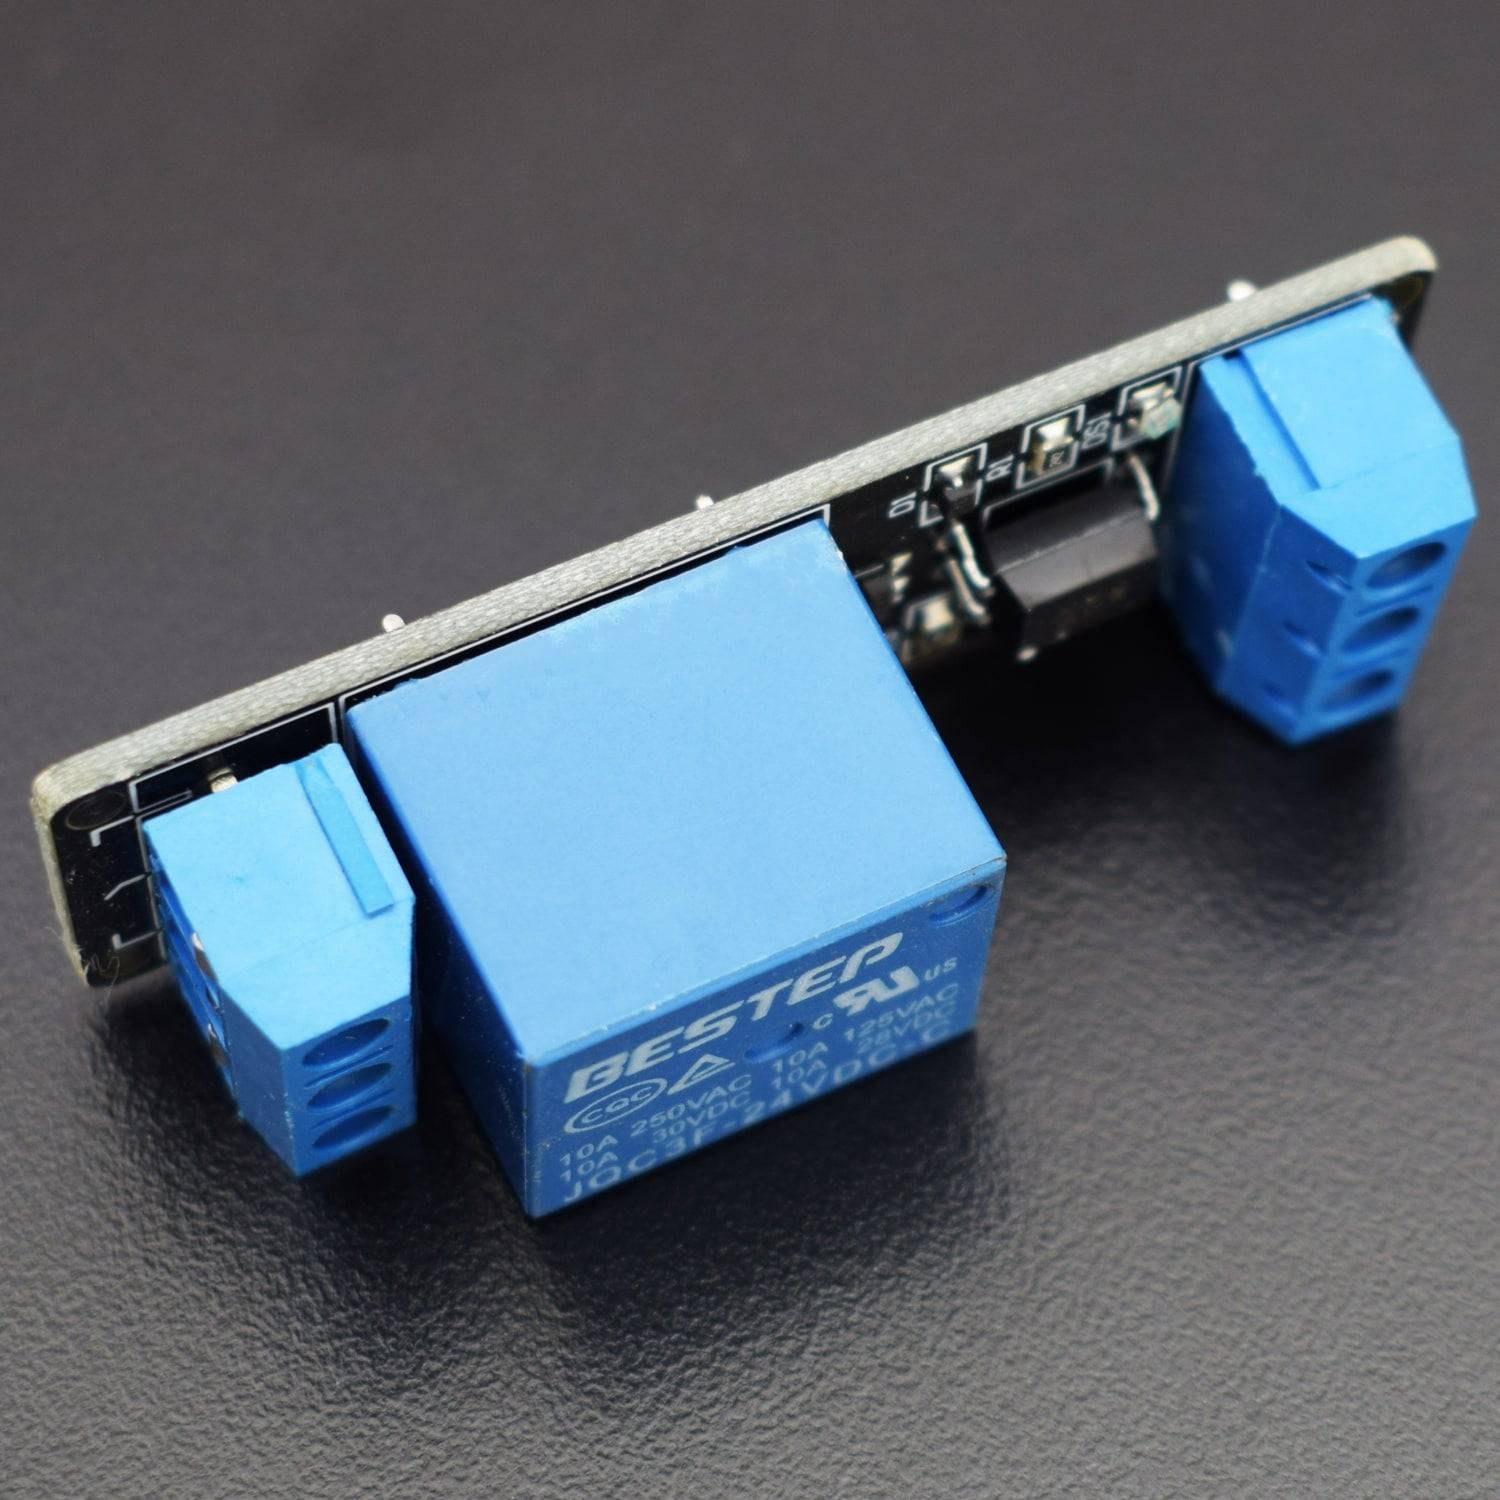 DC 24V 1 Channel Relay Module 30A With Optocoupler Isolation Support High-level Low-level Triggered - NA188 - REES52